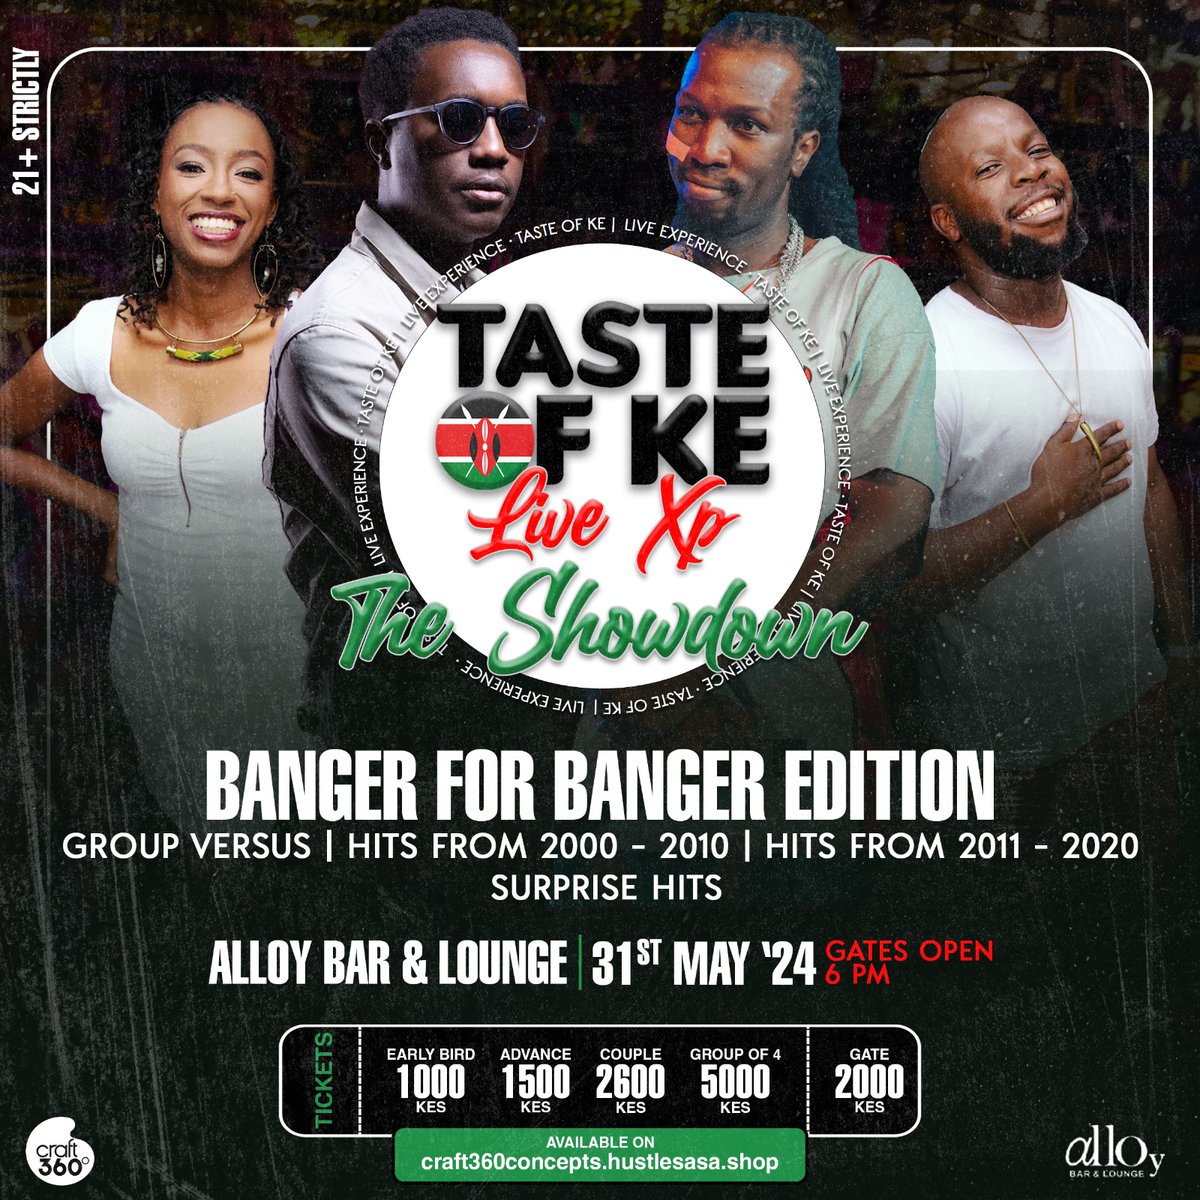 Here We Go... Officially inviting you to #TasteOfKE Banger for Banger Edition aka 'Buffet Edition' juu we shall be eating good fam 😃 Let's get ready to rumble and enjoy the best in Kenyan music at Alloy Lounge and Bar on Friday, 31st May 2024 Tickets: craft360concepts.hustlesasa.shop/?product=46923